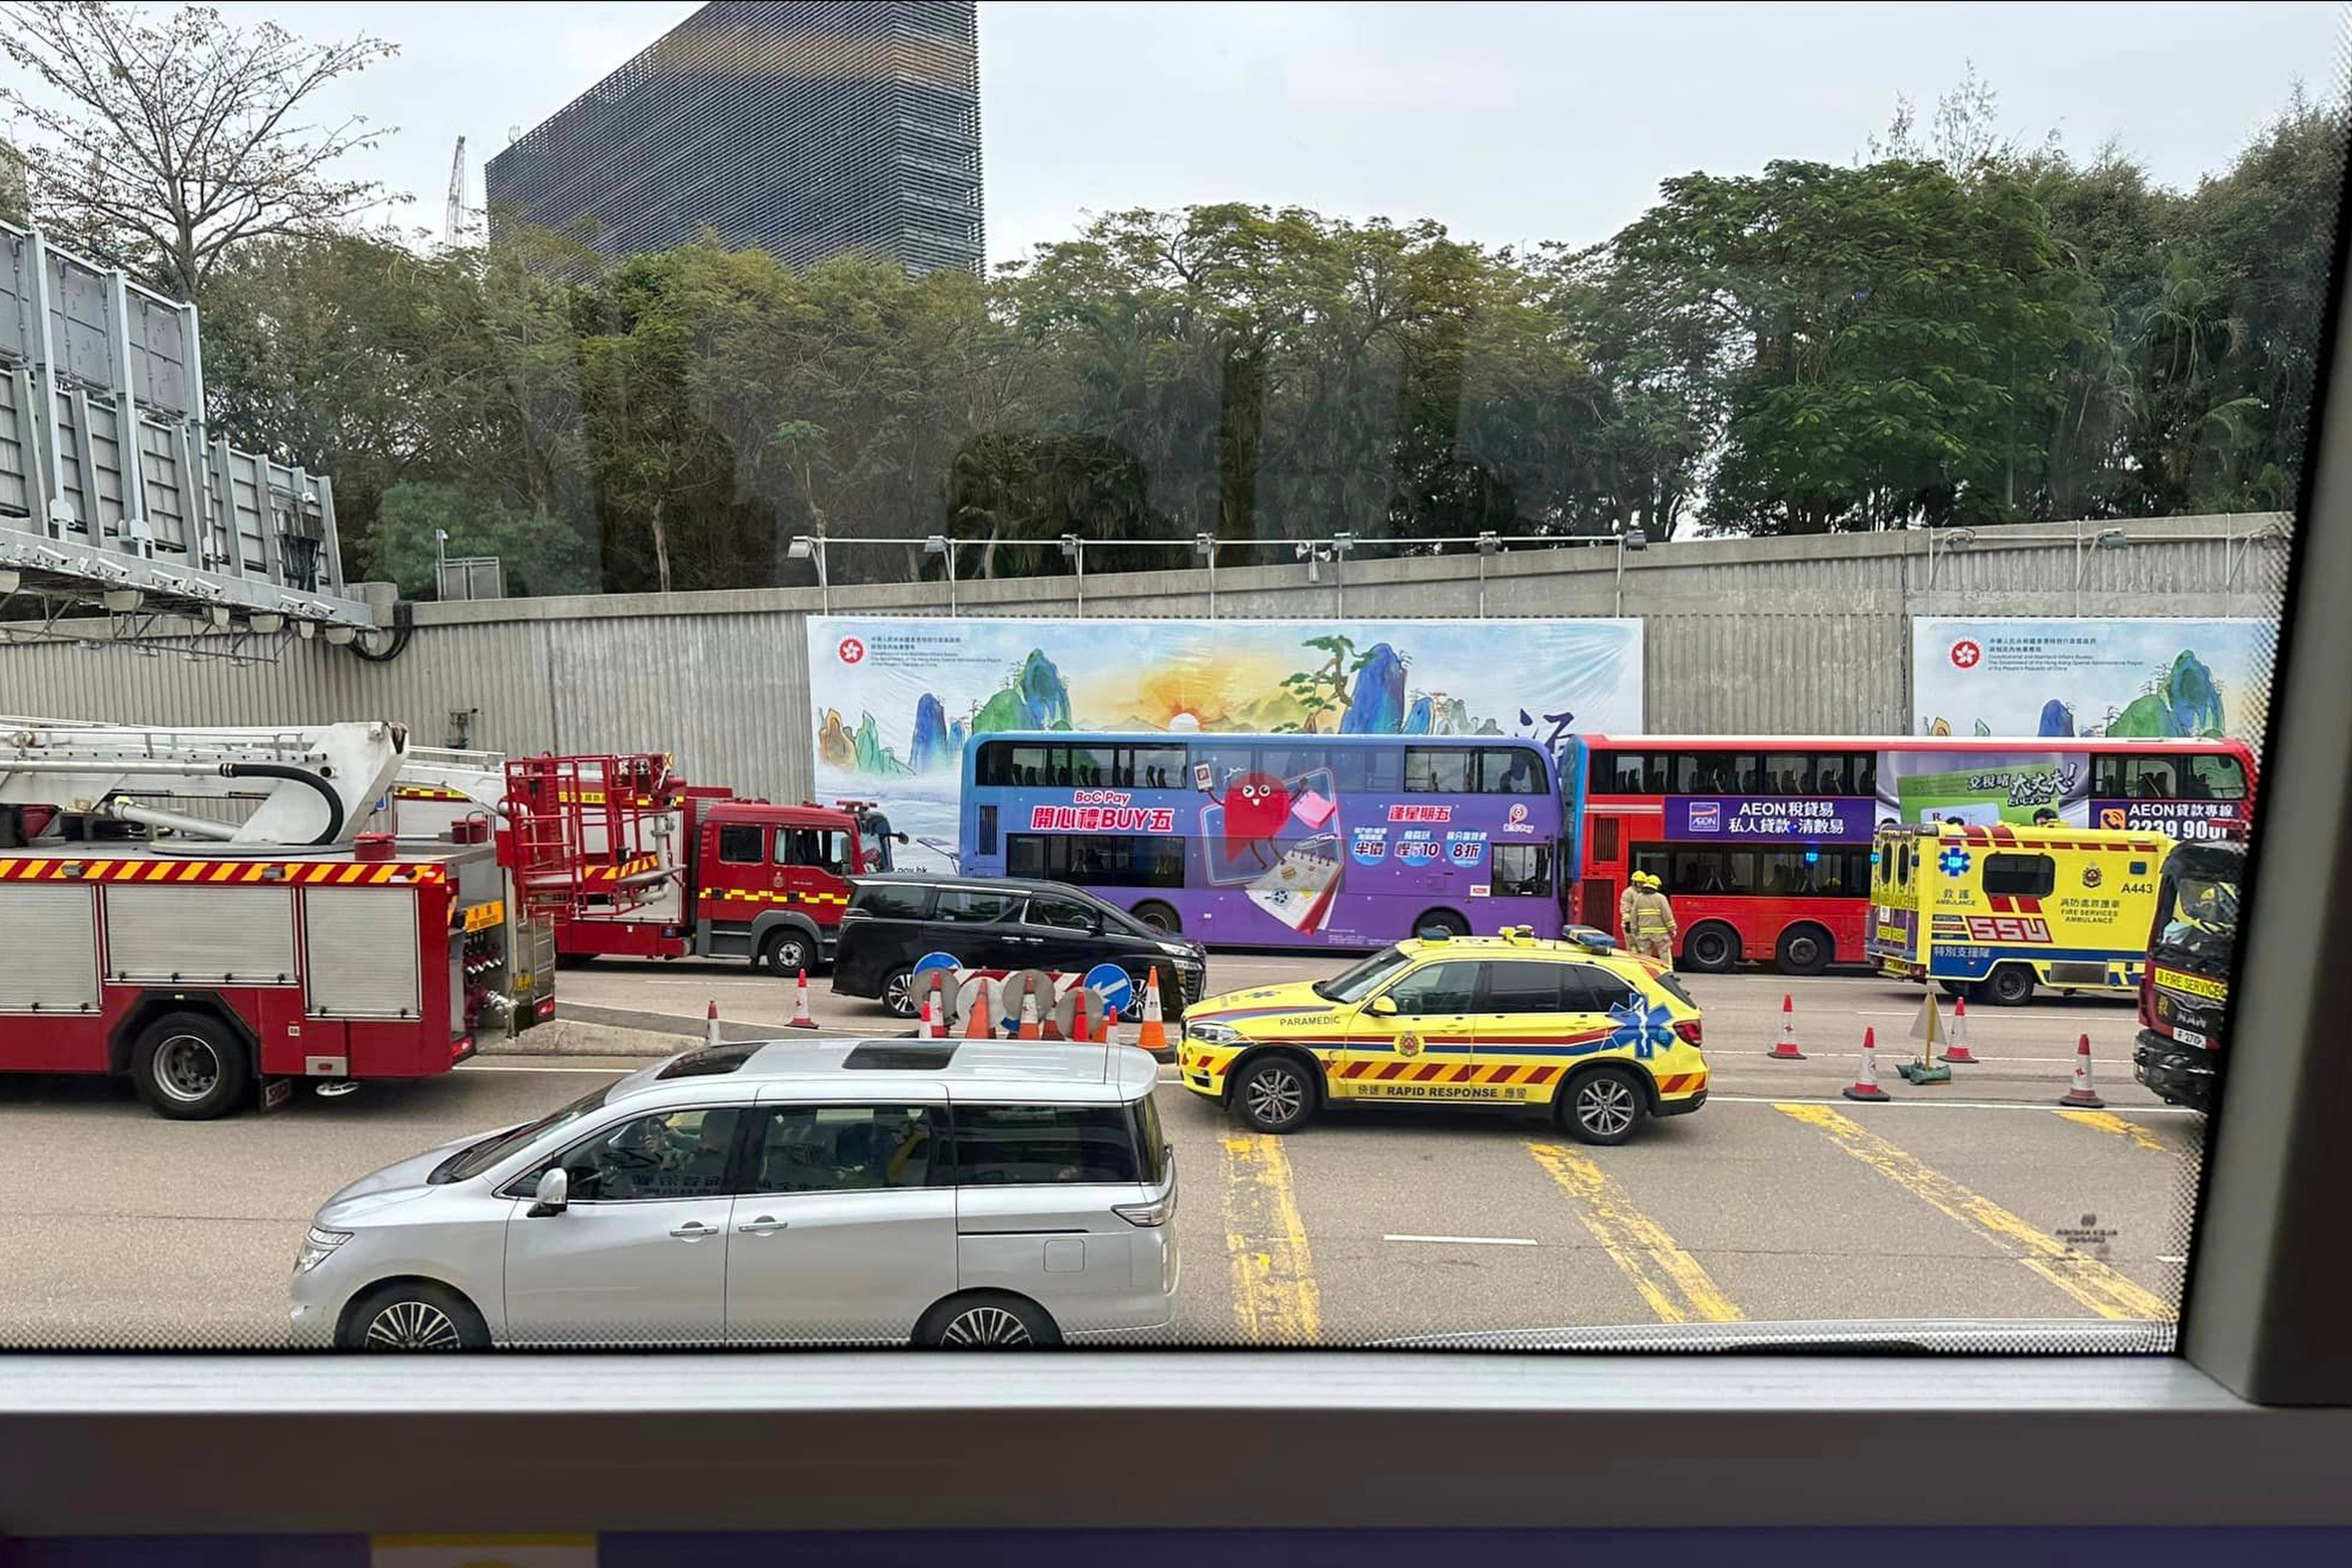 The KMB buses collided near the entrance of the Western Harbour Tunnel. Photo: Facebook/ 香港交通及突發事故報料區